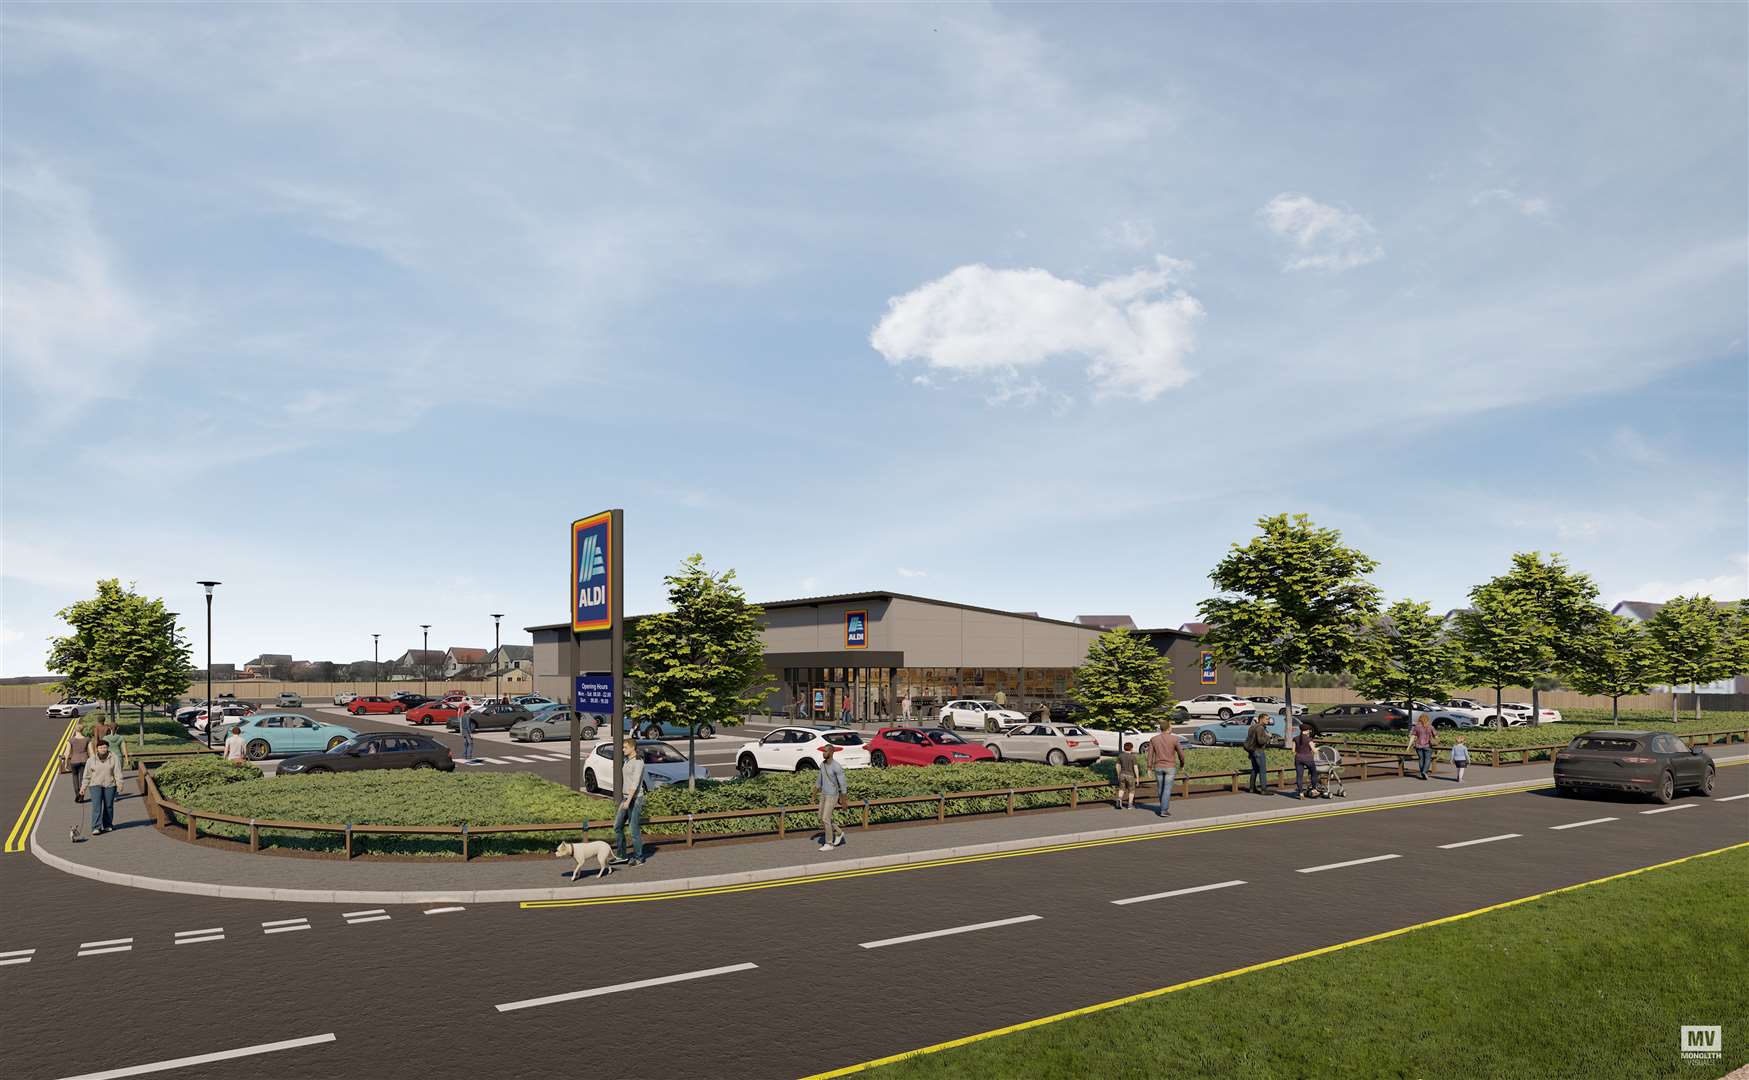 Aldi are set to commence work on the new store early next year.